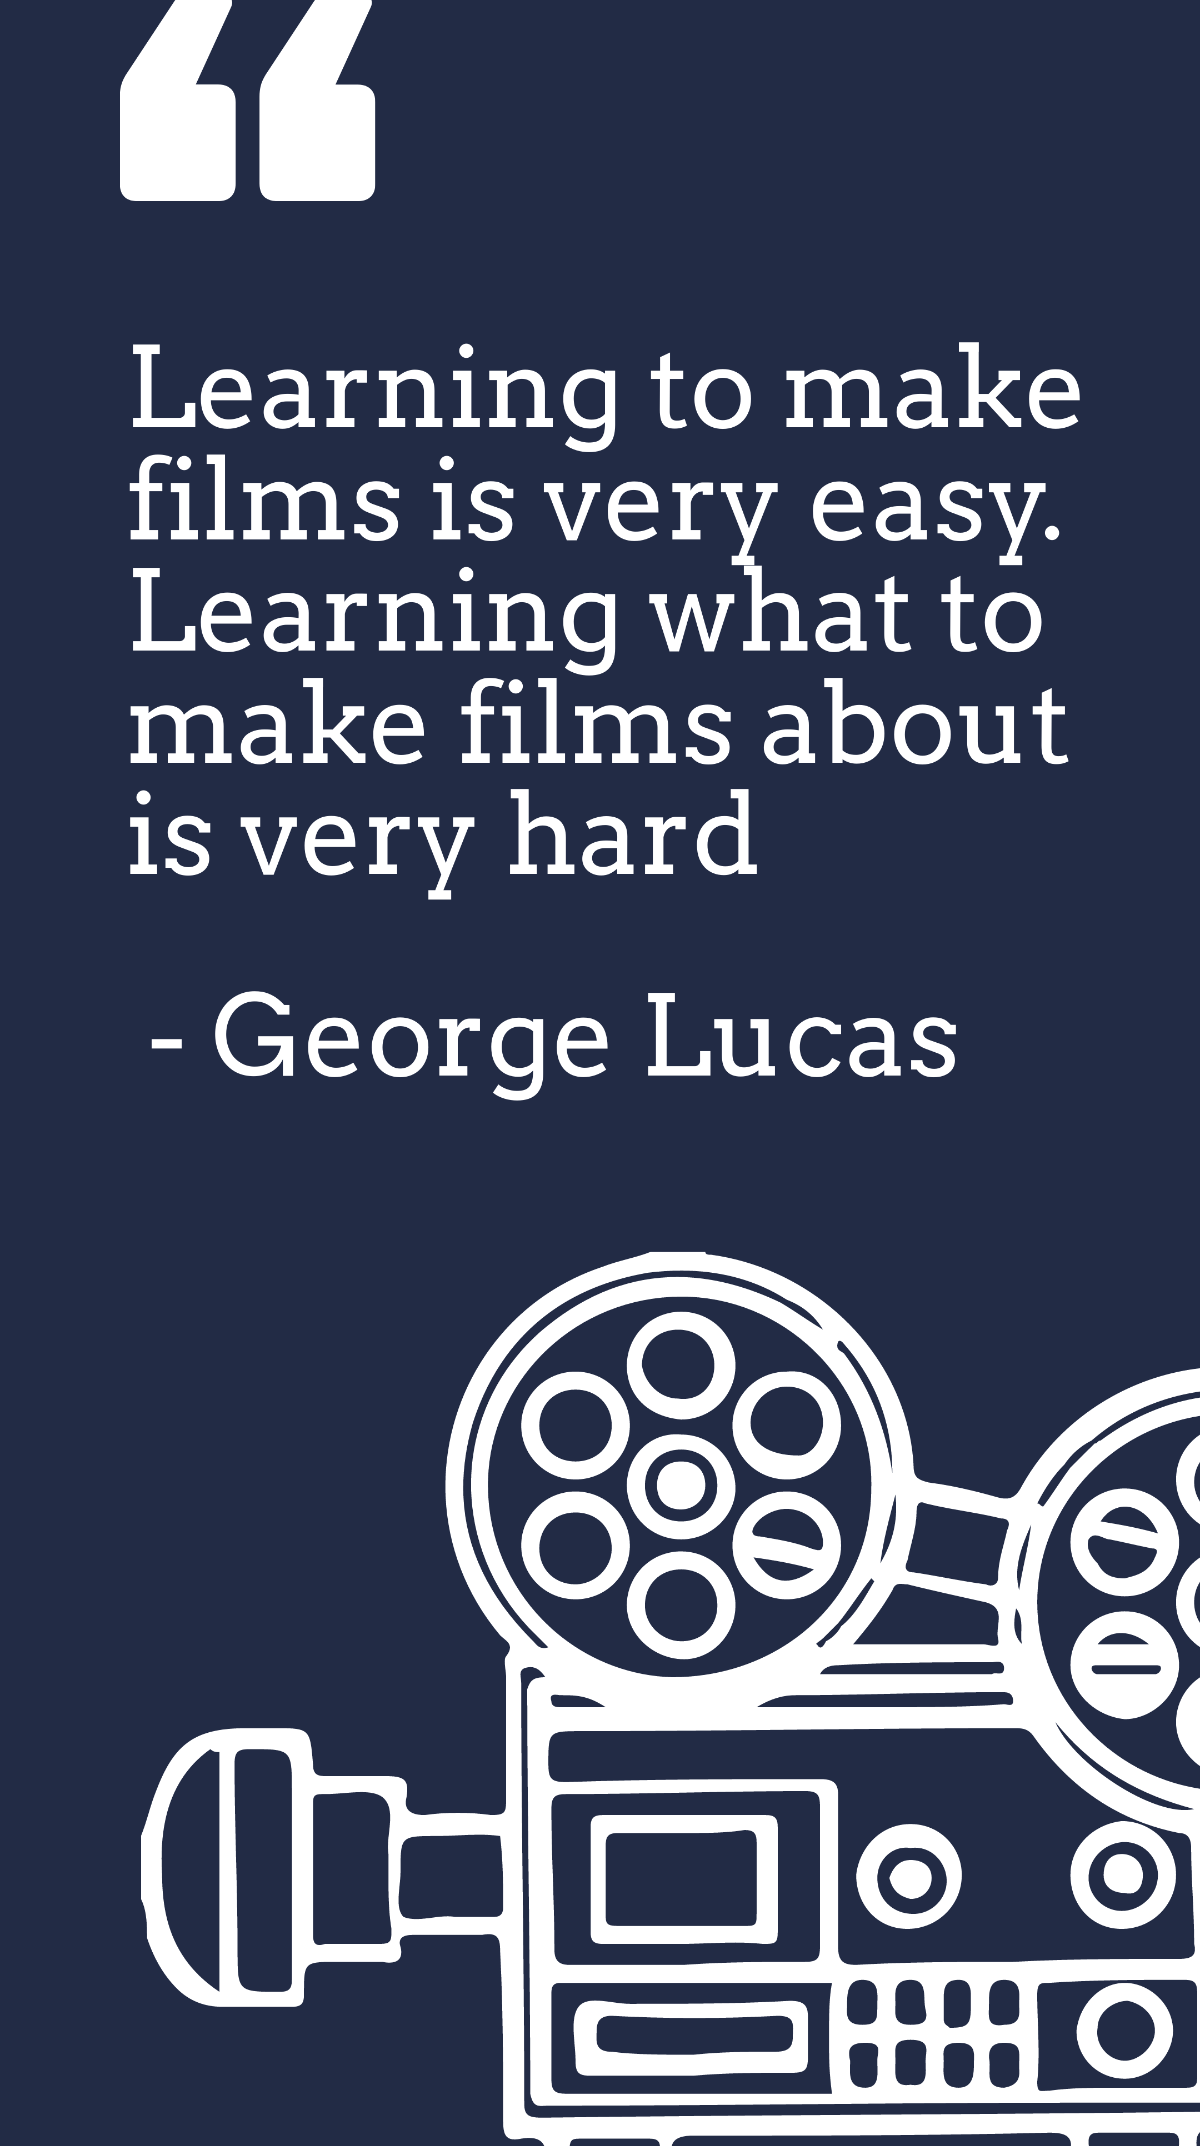 George Lucas-Learning to make films is very easy. Learning what to make films about is very hard